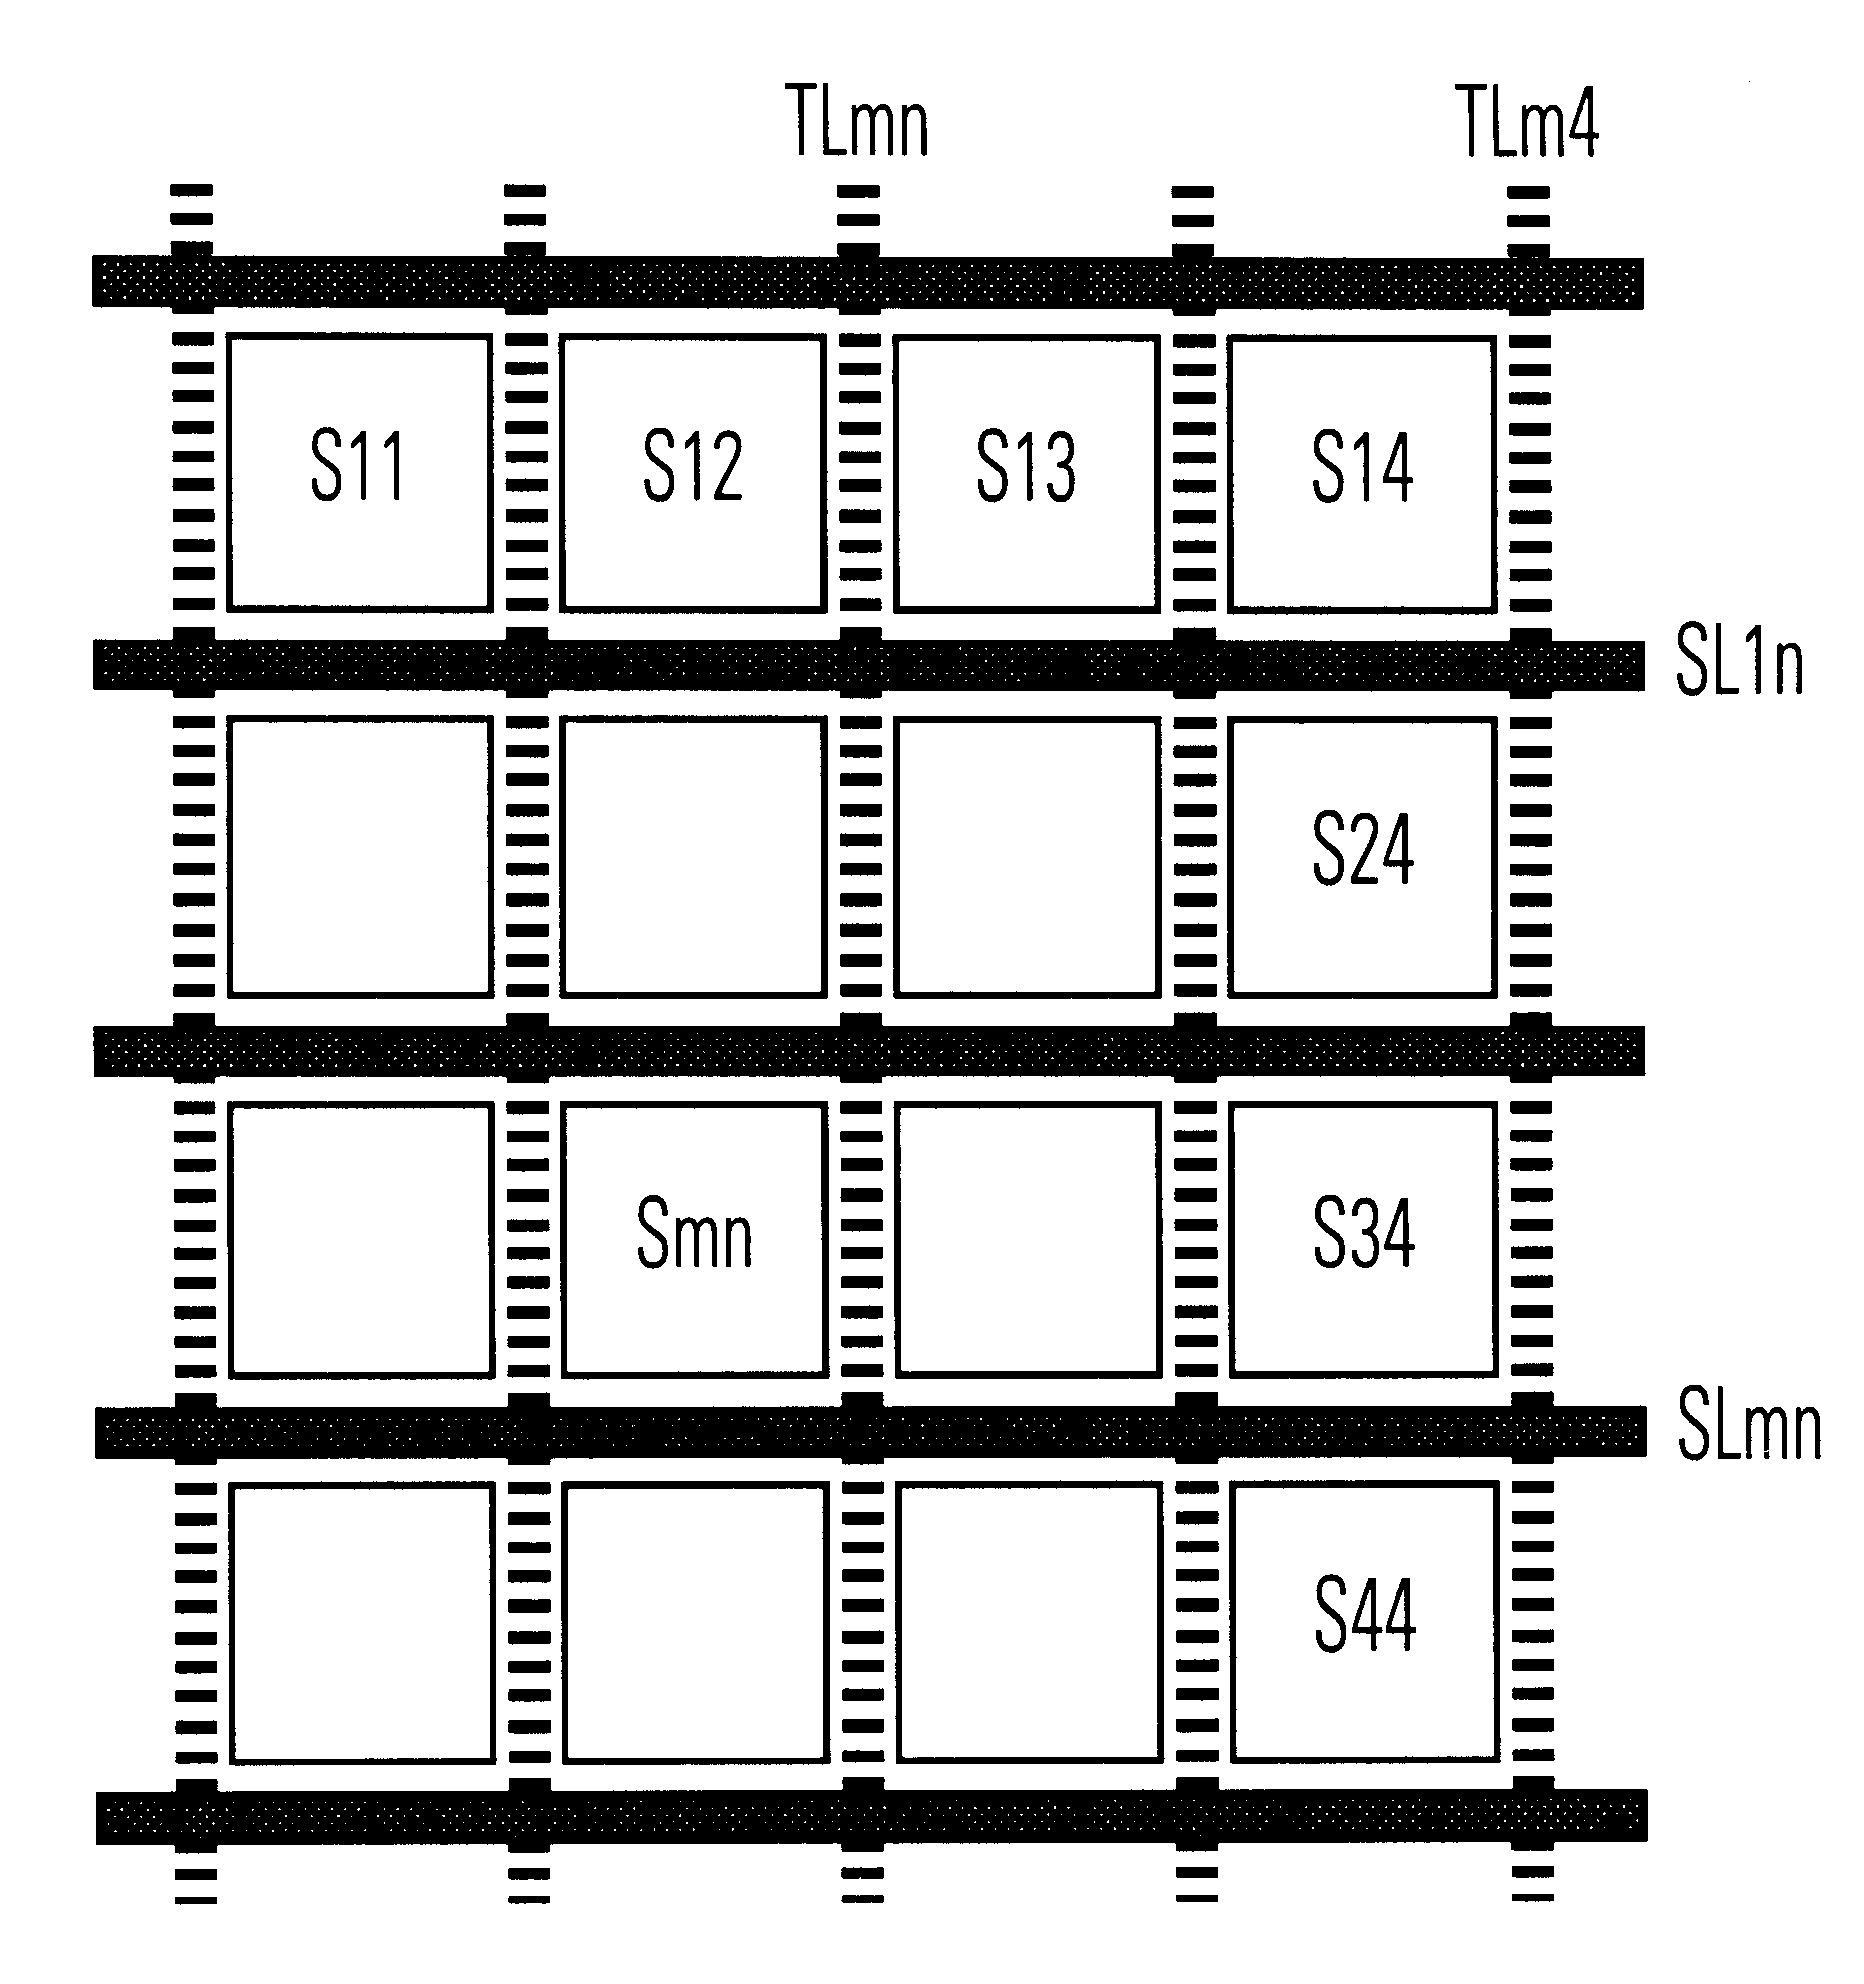 Information processing unit, information processing structure unit, information processing structure, memory structure unit and semiconductor memory device